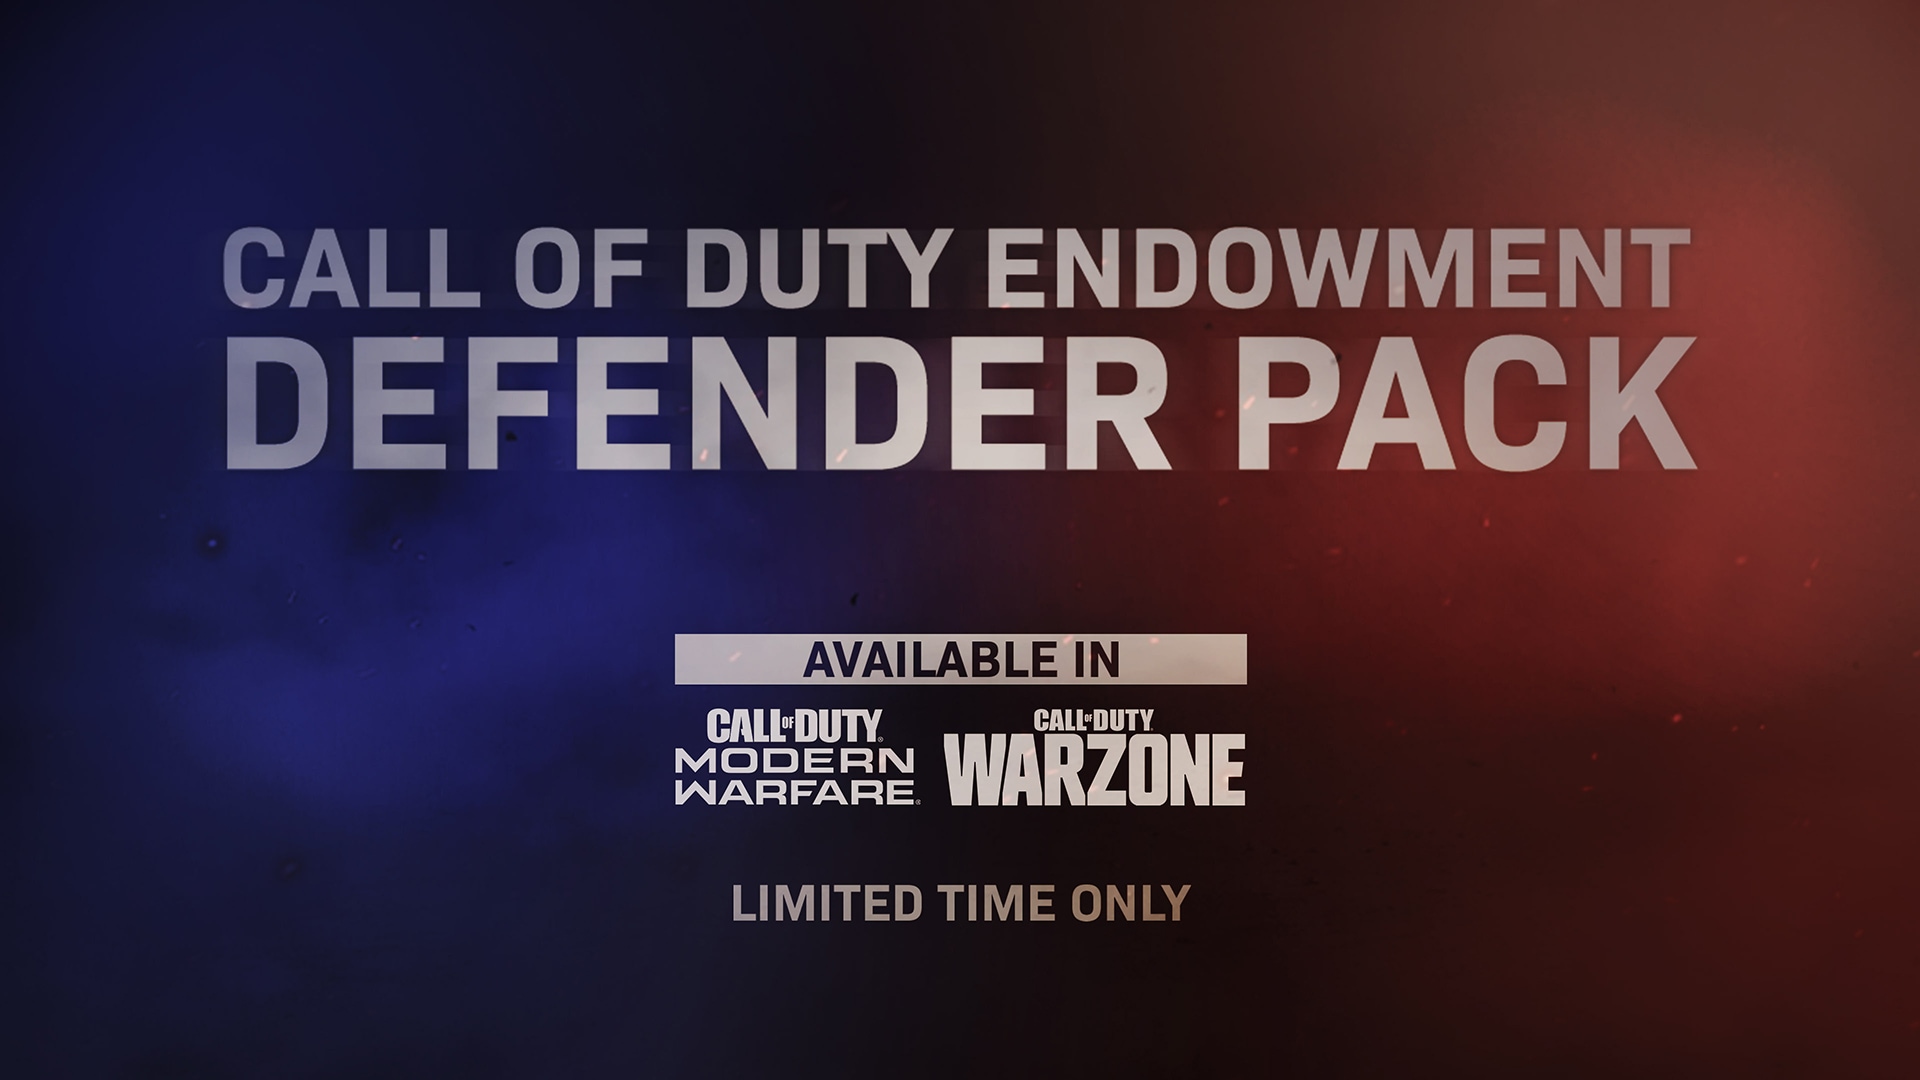 Support Veterans with the Call of Duty Endowment Defender Pack